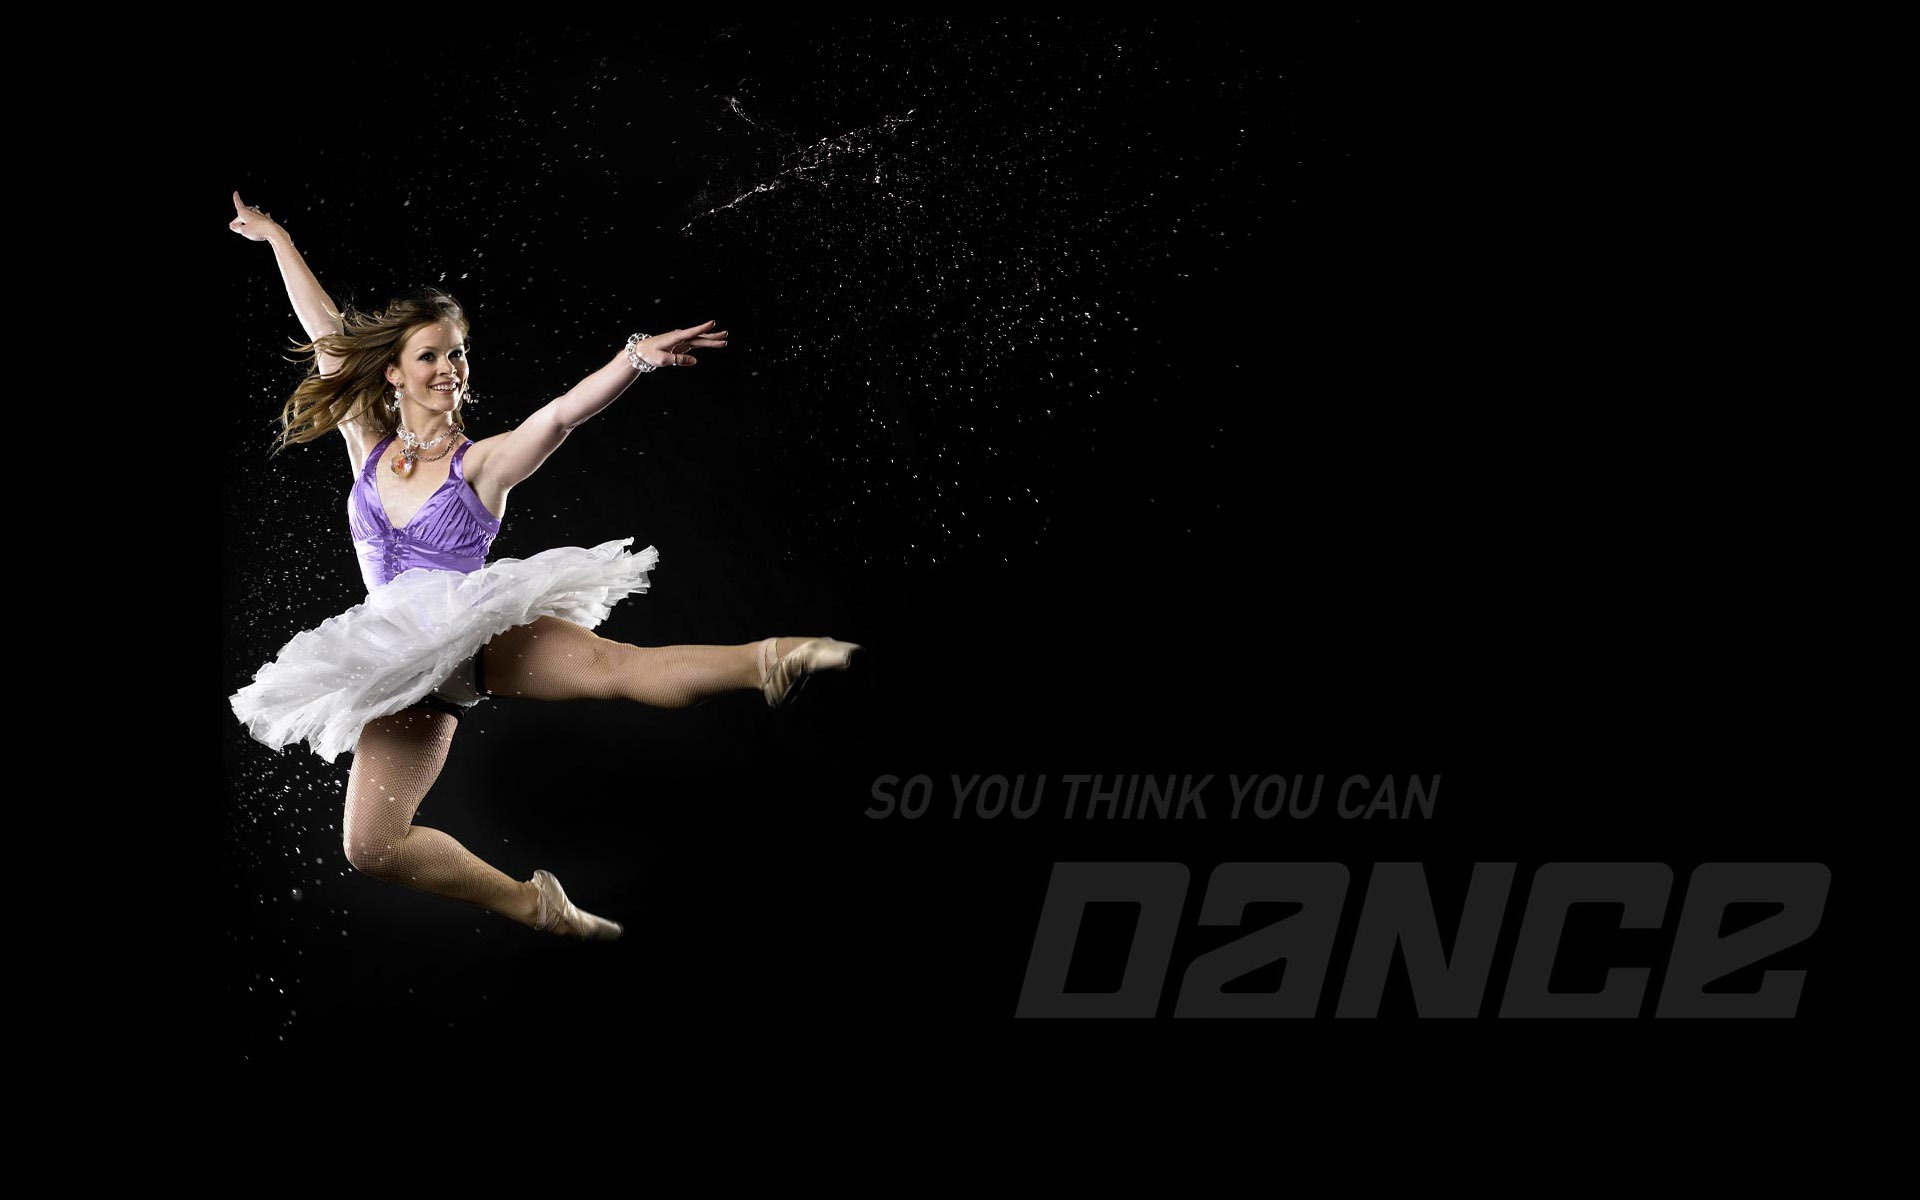 So You Think You Can Dance wallpaper (1) #15 - 1920x1200